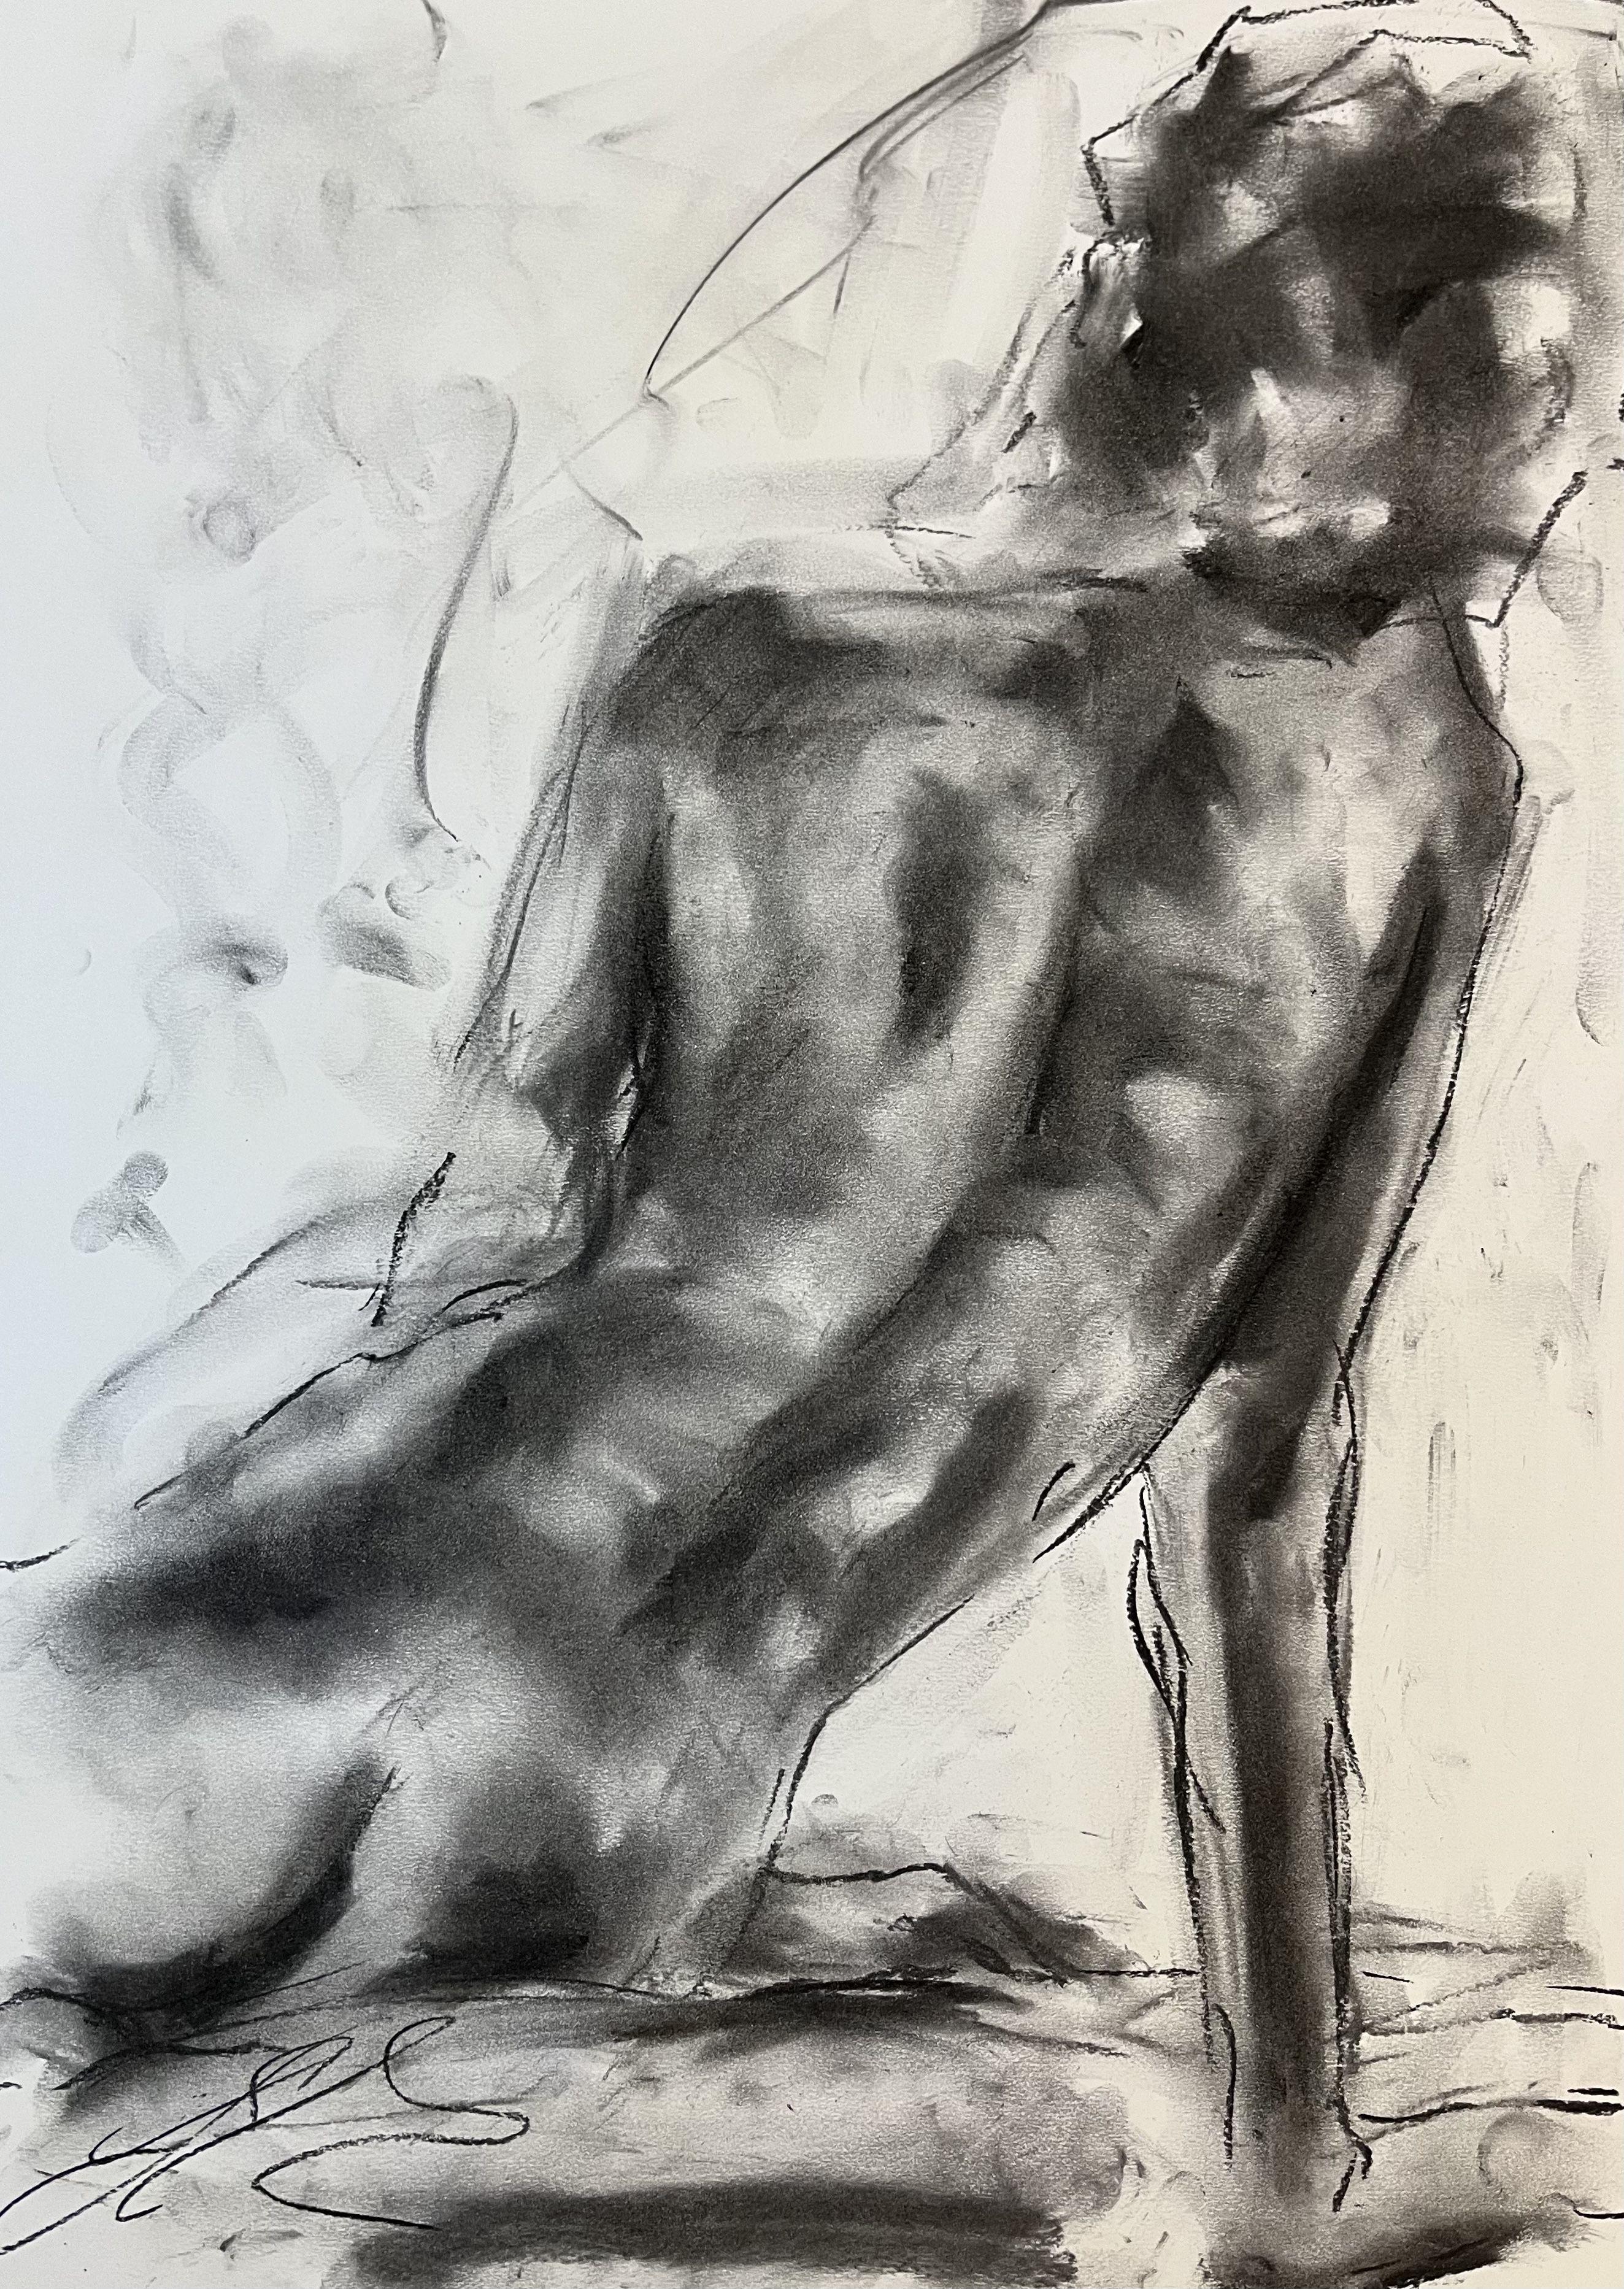 Ask, Drawing, Charcoal on Paper - Art by James Shipton